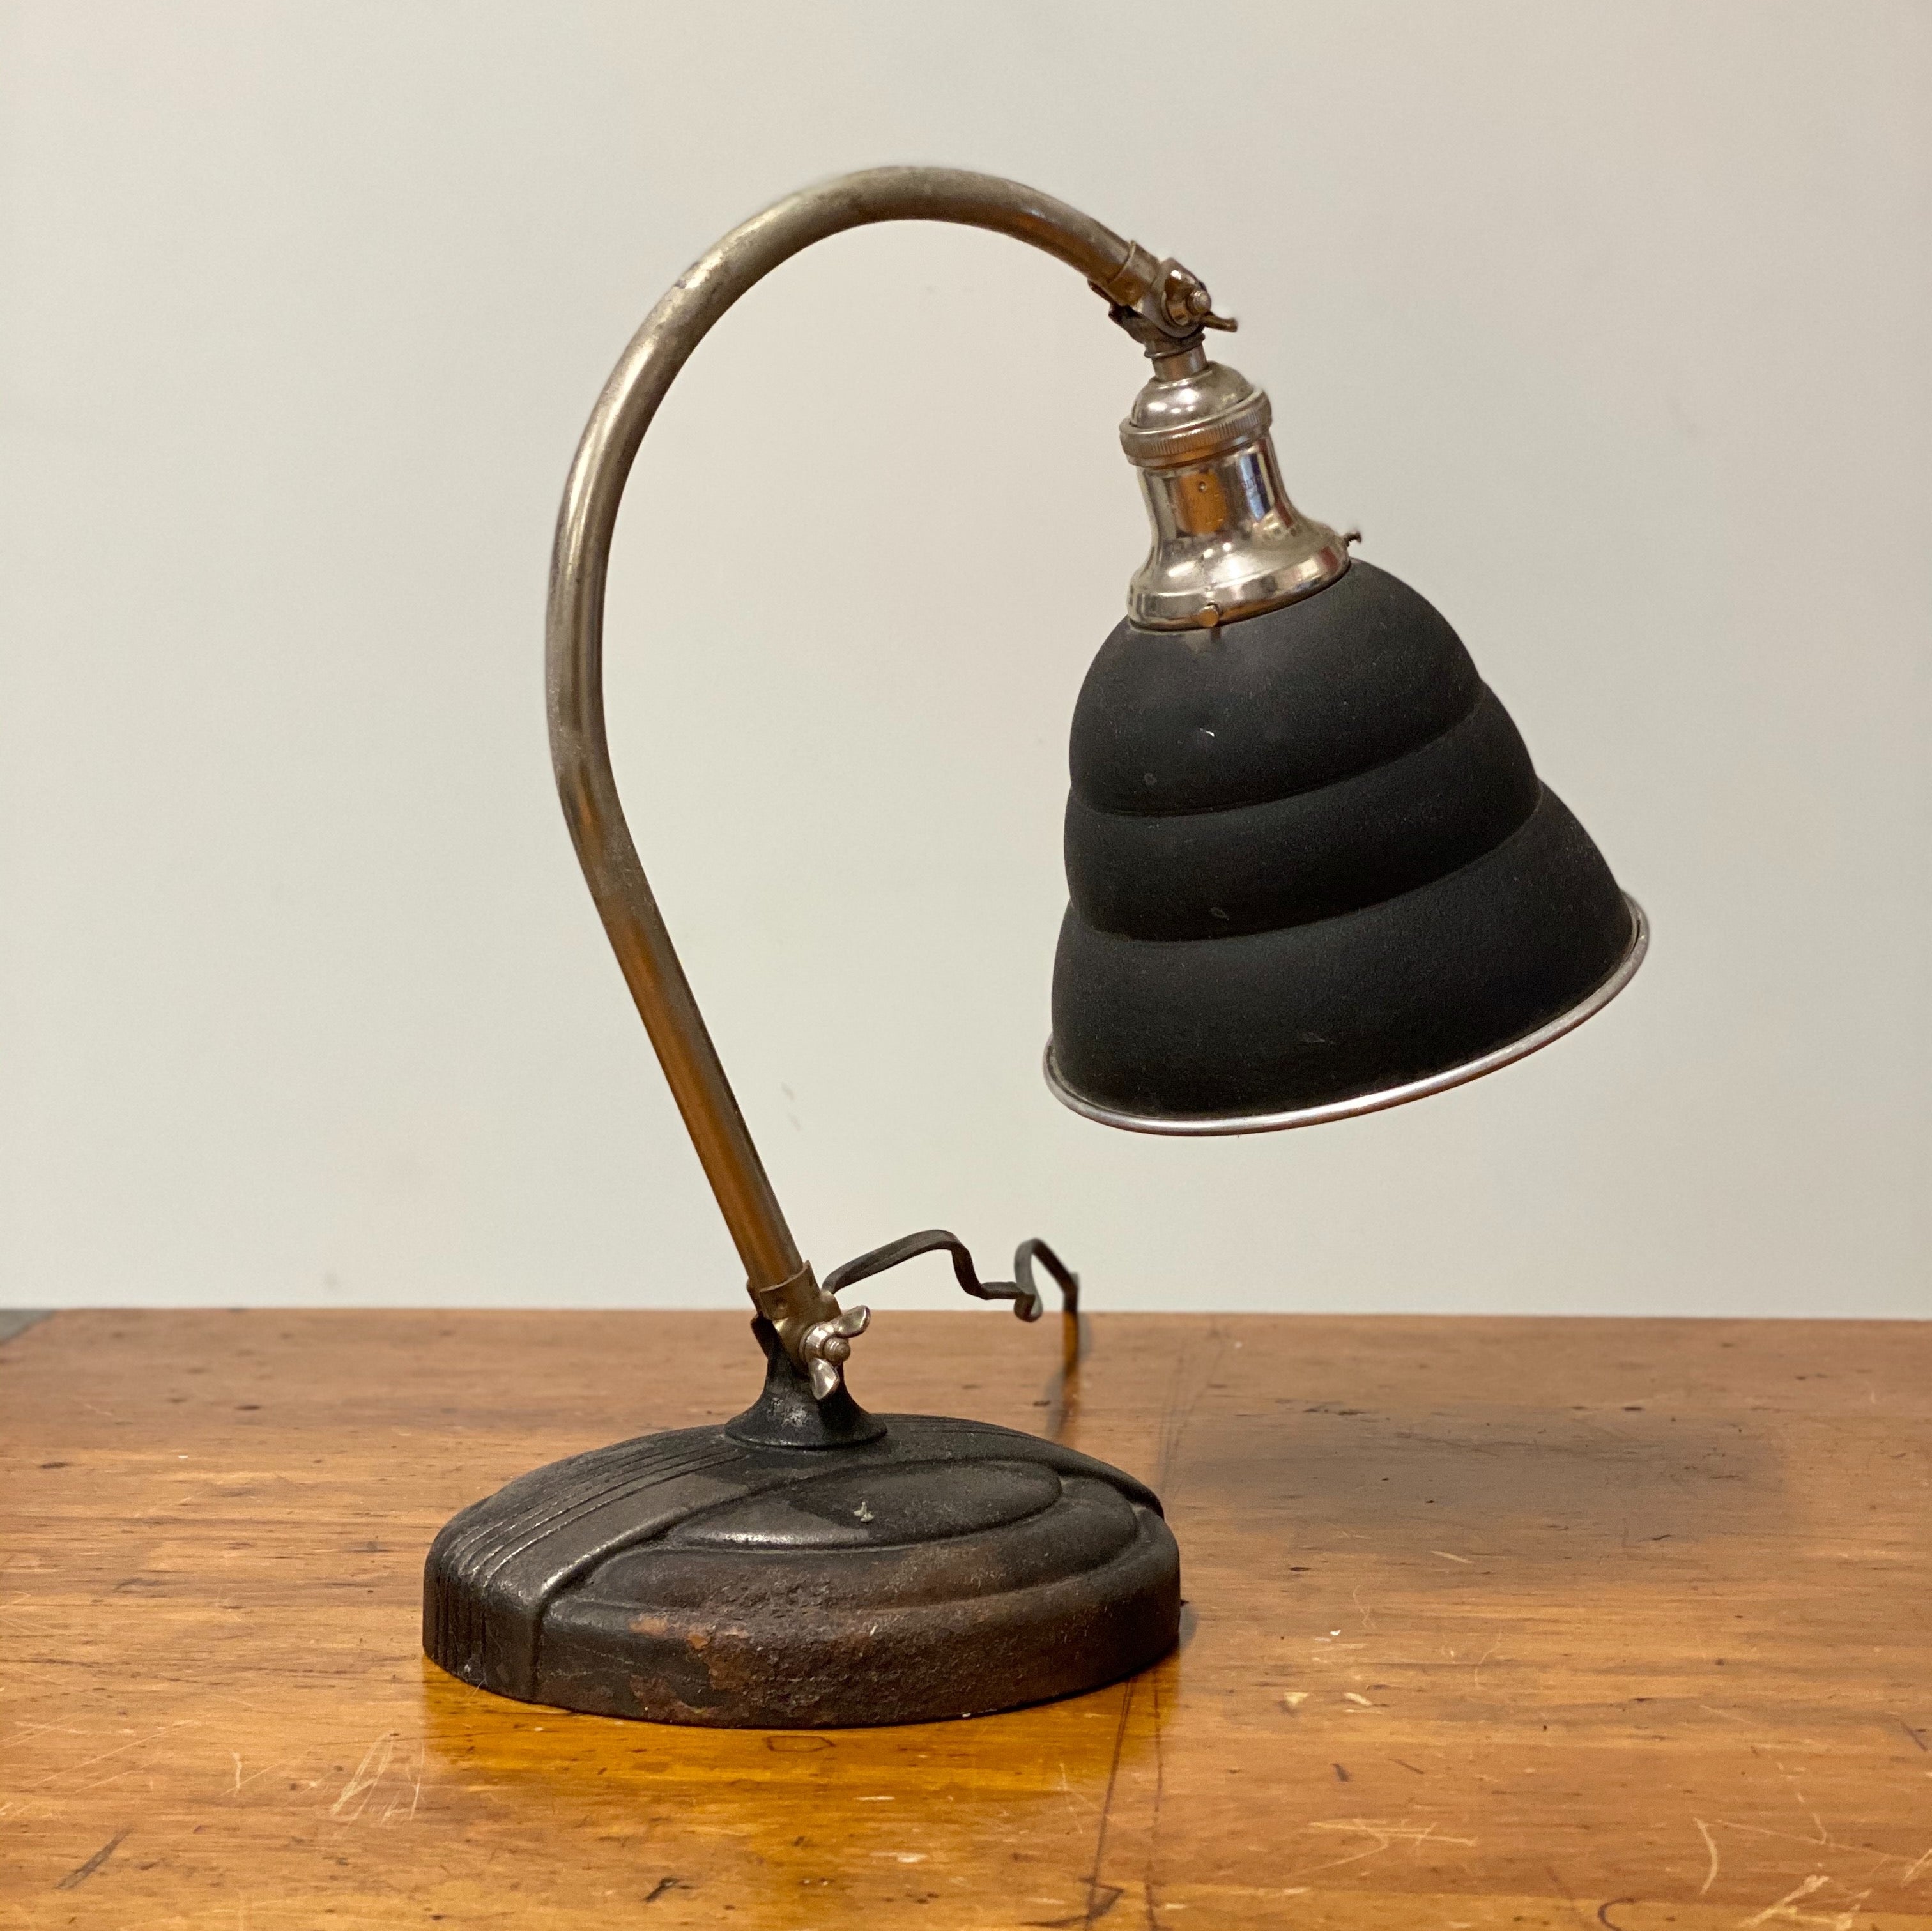 Vintage Articulating Desk Lamp with Unusual Shade |  1920s